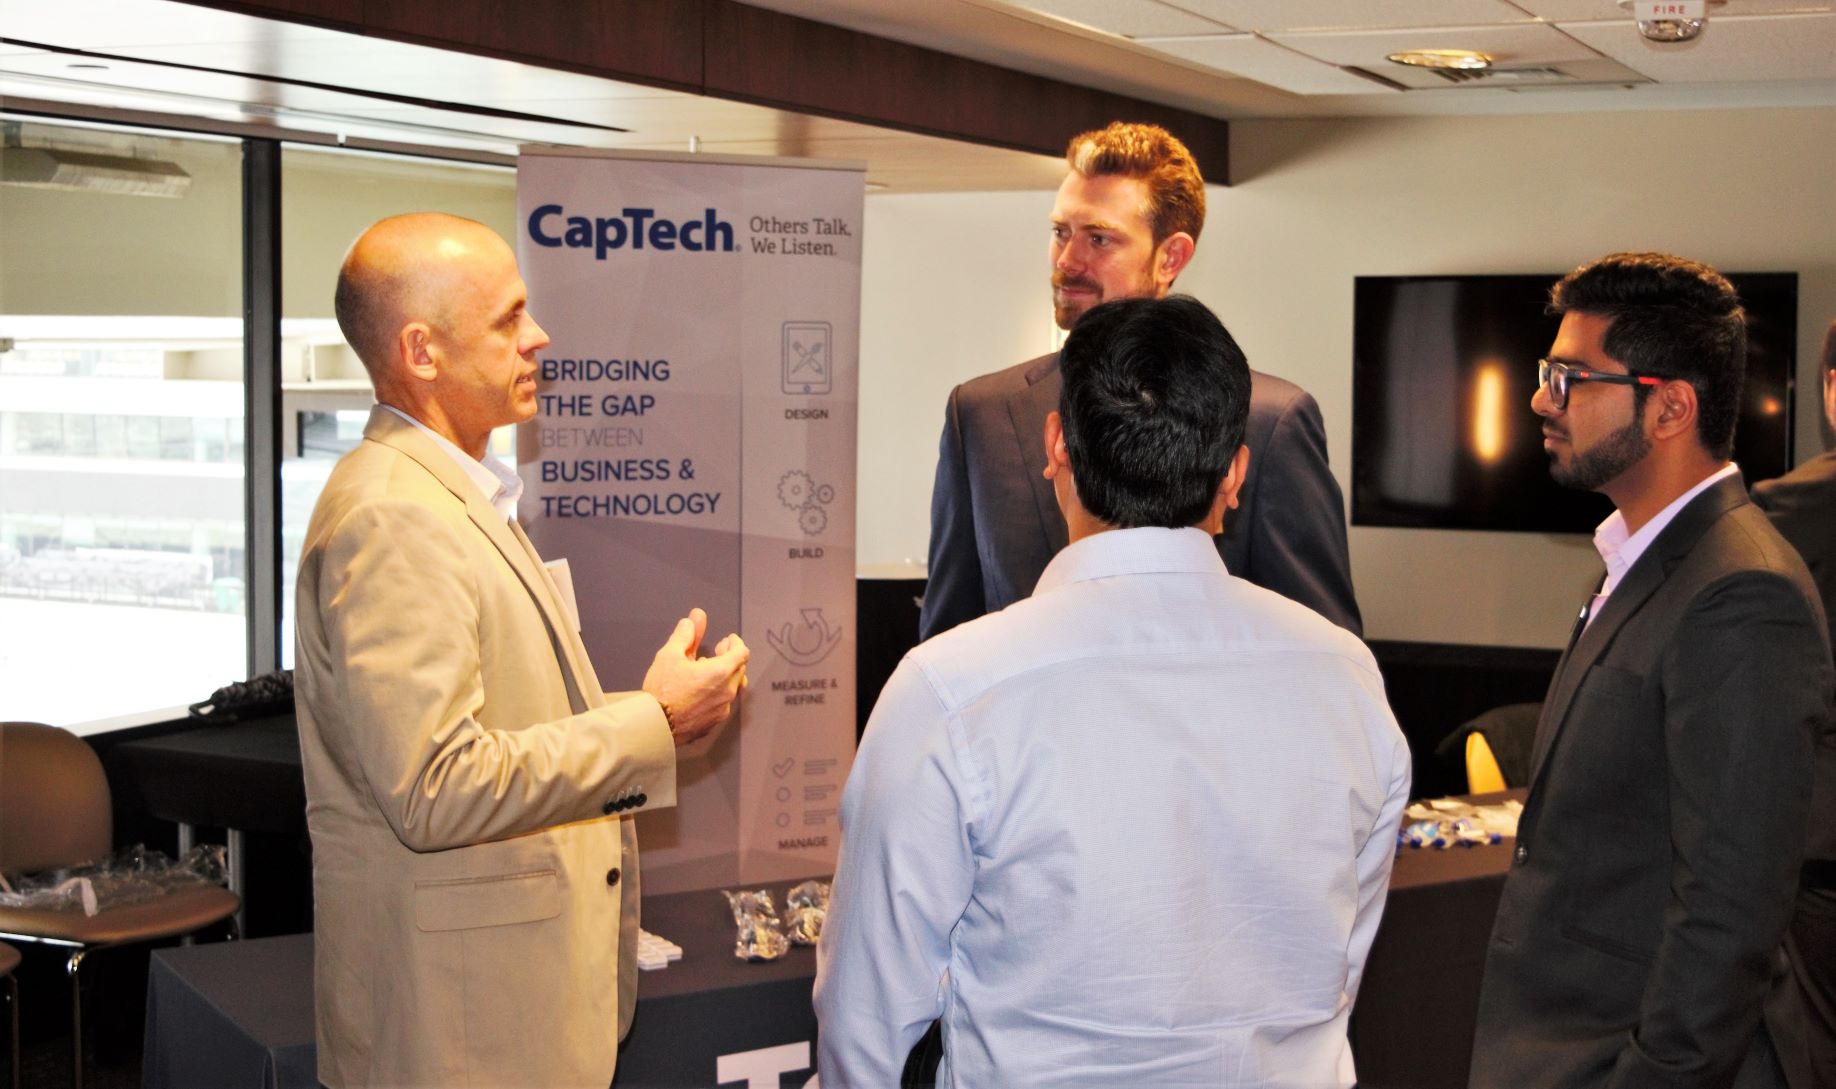 Students meet with a CapTech representative.